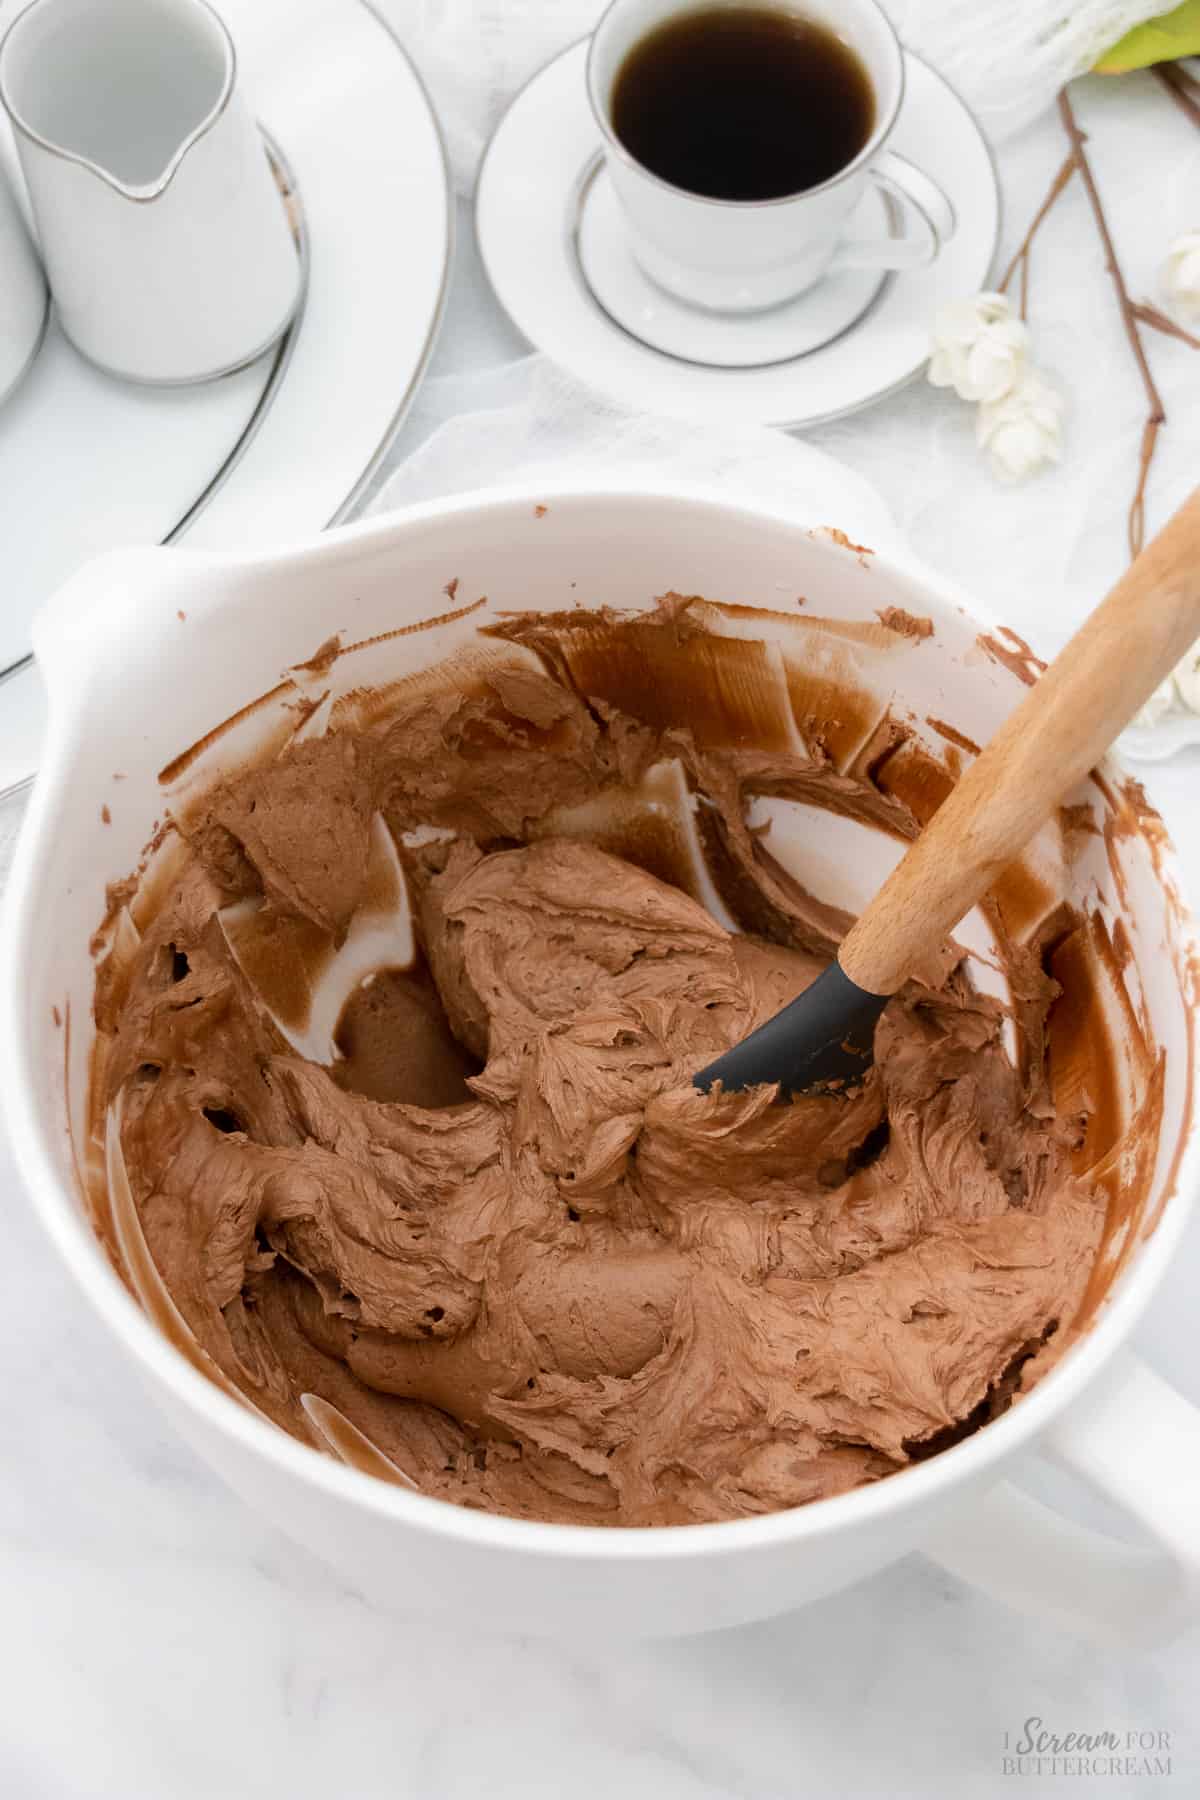 Chocolate nutella frosting made in a large white mixing bowl.